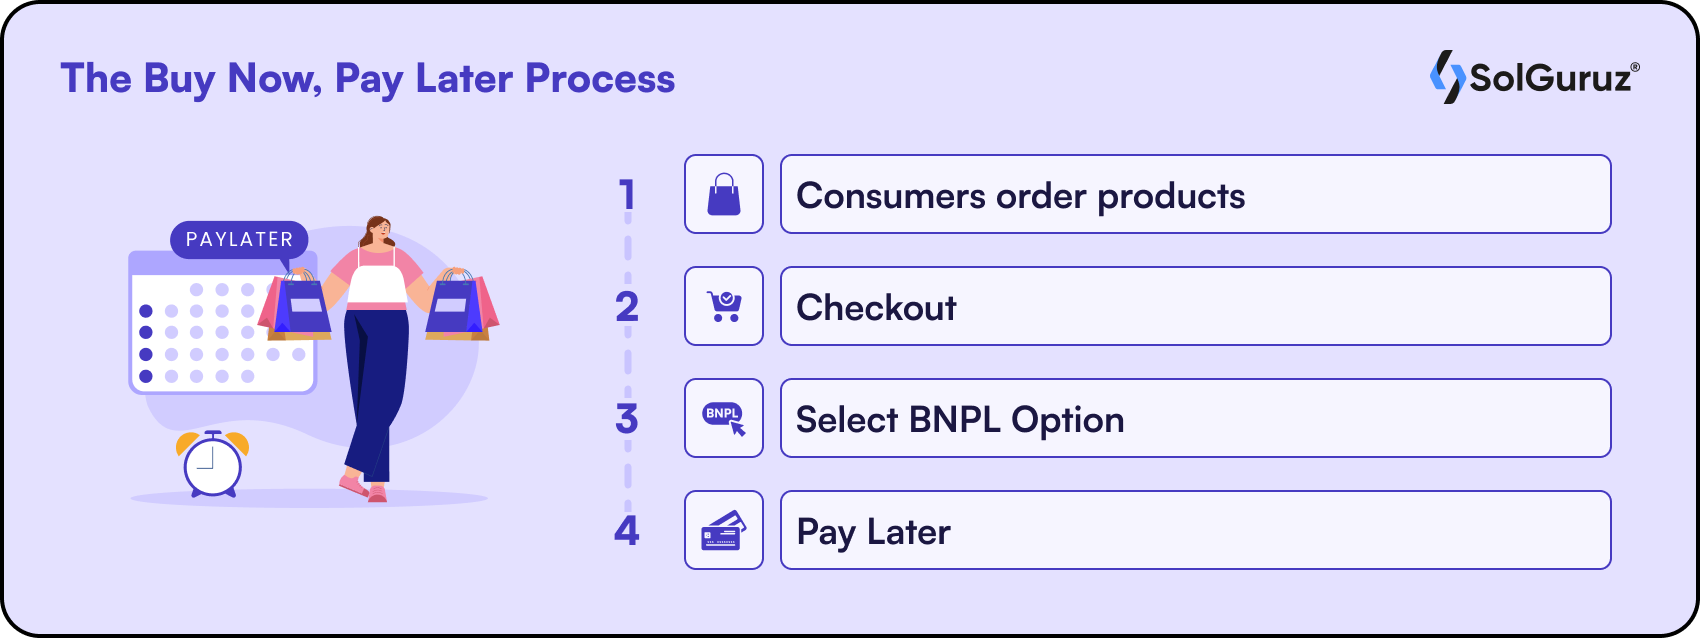 The Buy Now, Pay Later Process - How BNPL Works